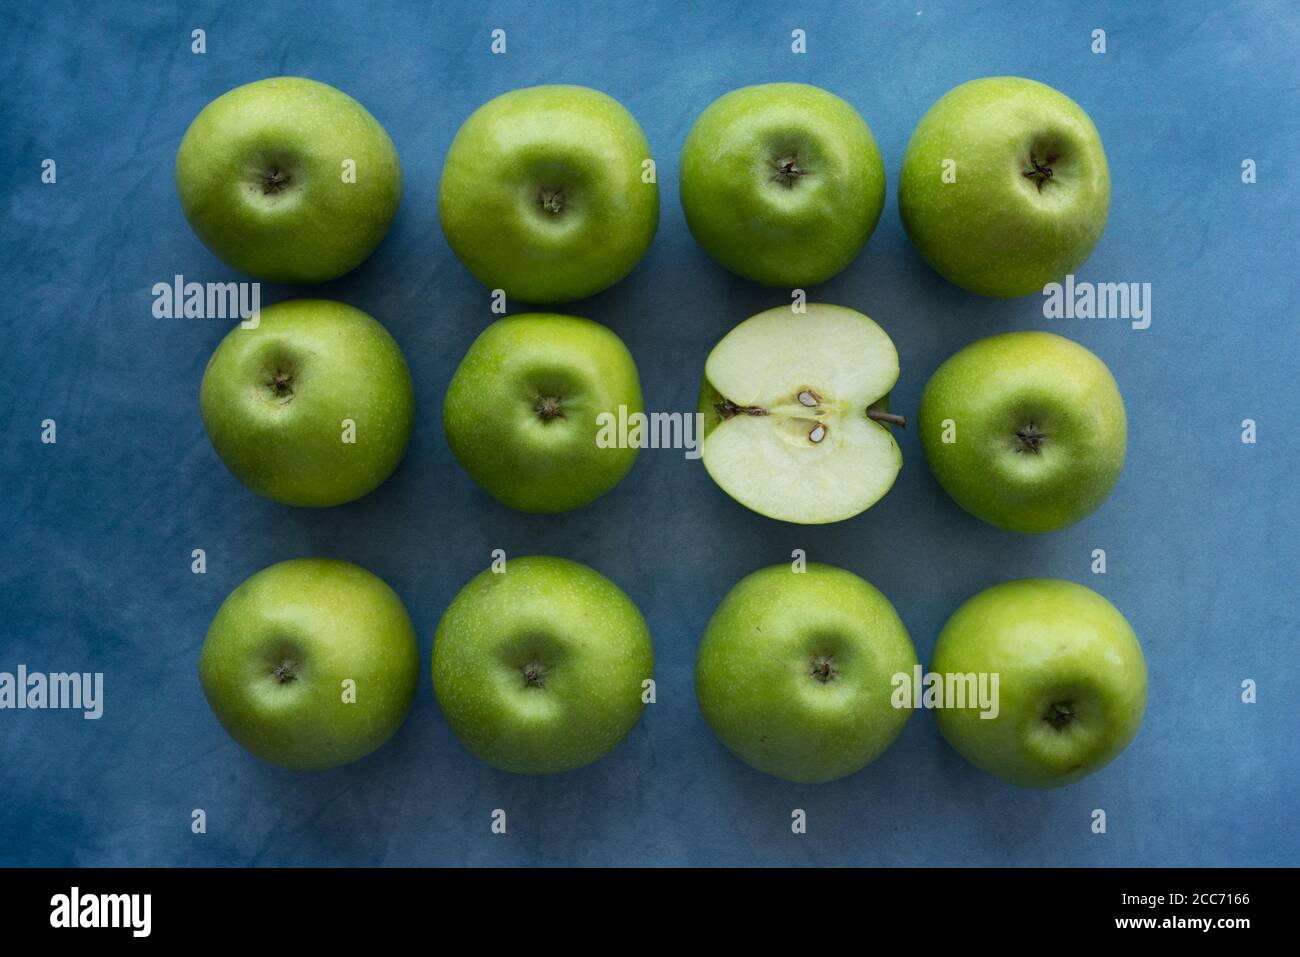 Bright green apples on blue background. Stock Photo